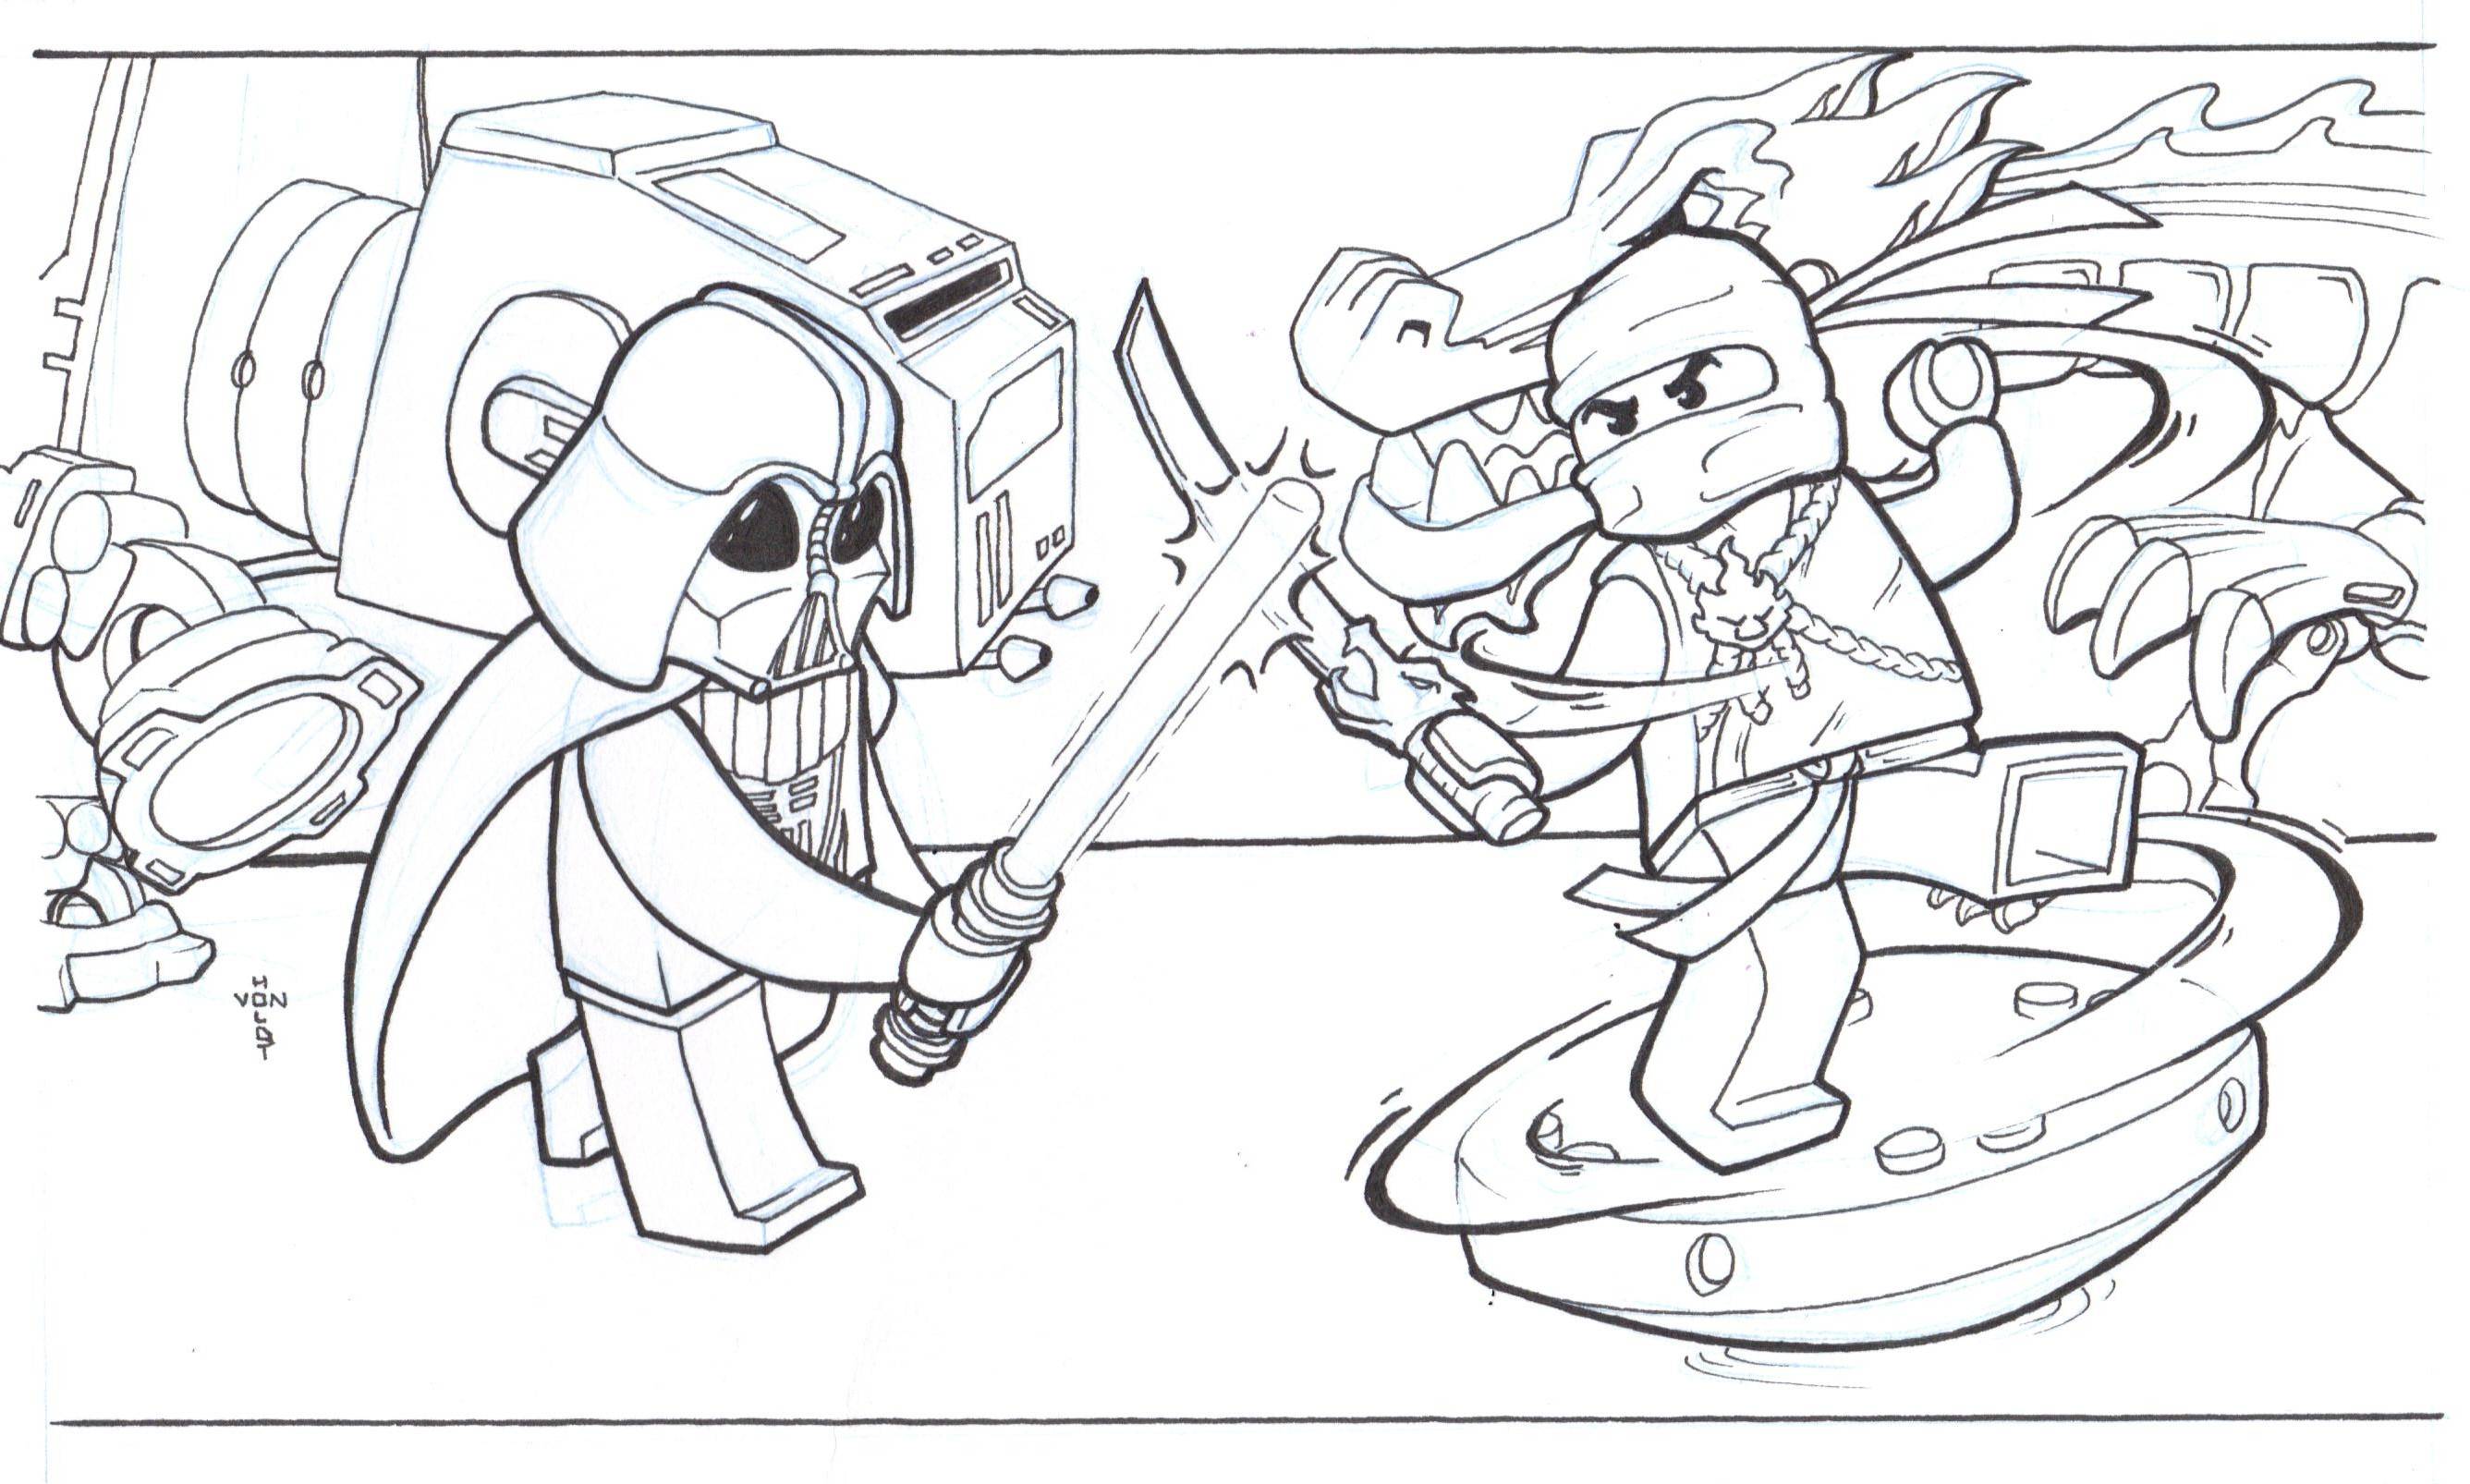 Free Printable Ninjago Coloring Pages   Free Coloring Pages ...